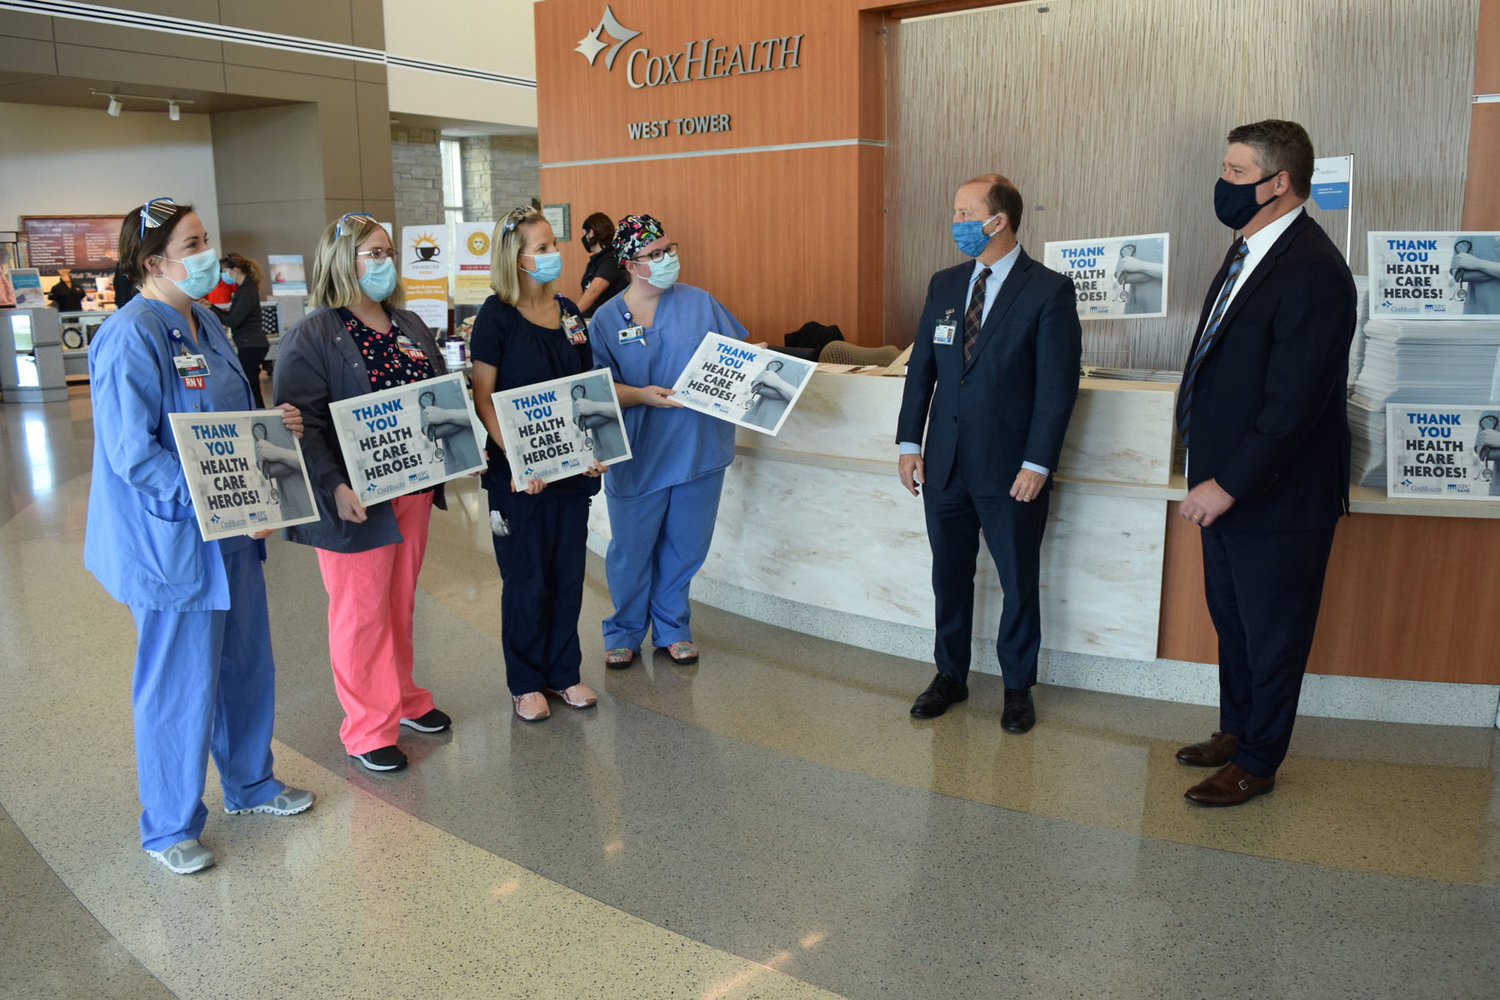 ‘HEALTH CARE HEROES’
CoxHealth workers hold signs presented by Springfield First Community Bank CEO Monte McNew, far right, on Feb. 19. The bank has donated 5,000 signs that say “Thank you, Health Care Heroes” for hospital employees, including CoxHealth President and CEO Steve Edwards, center, to pick up and display in their yards. “SFC Bank is especially grateful for the time, energy and expertise given by these front-line workers and those that support them,” McNew said in a news release.